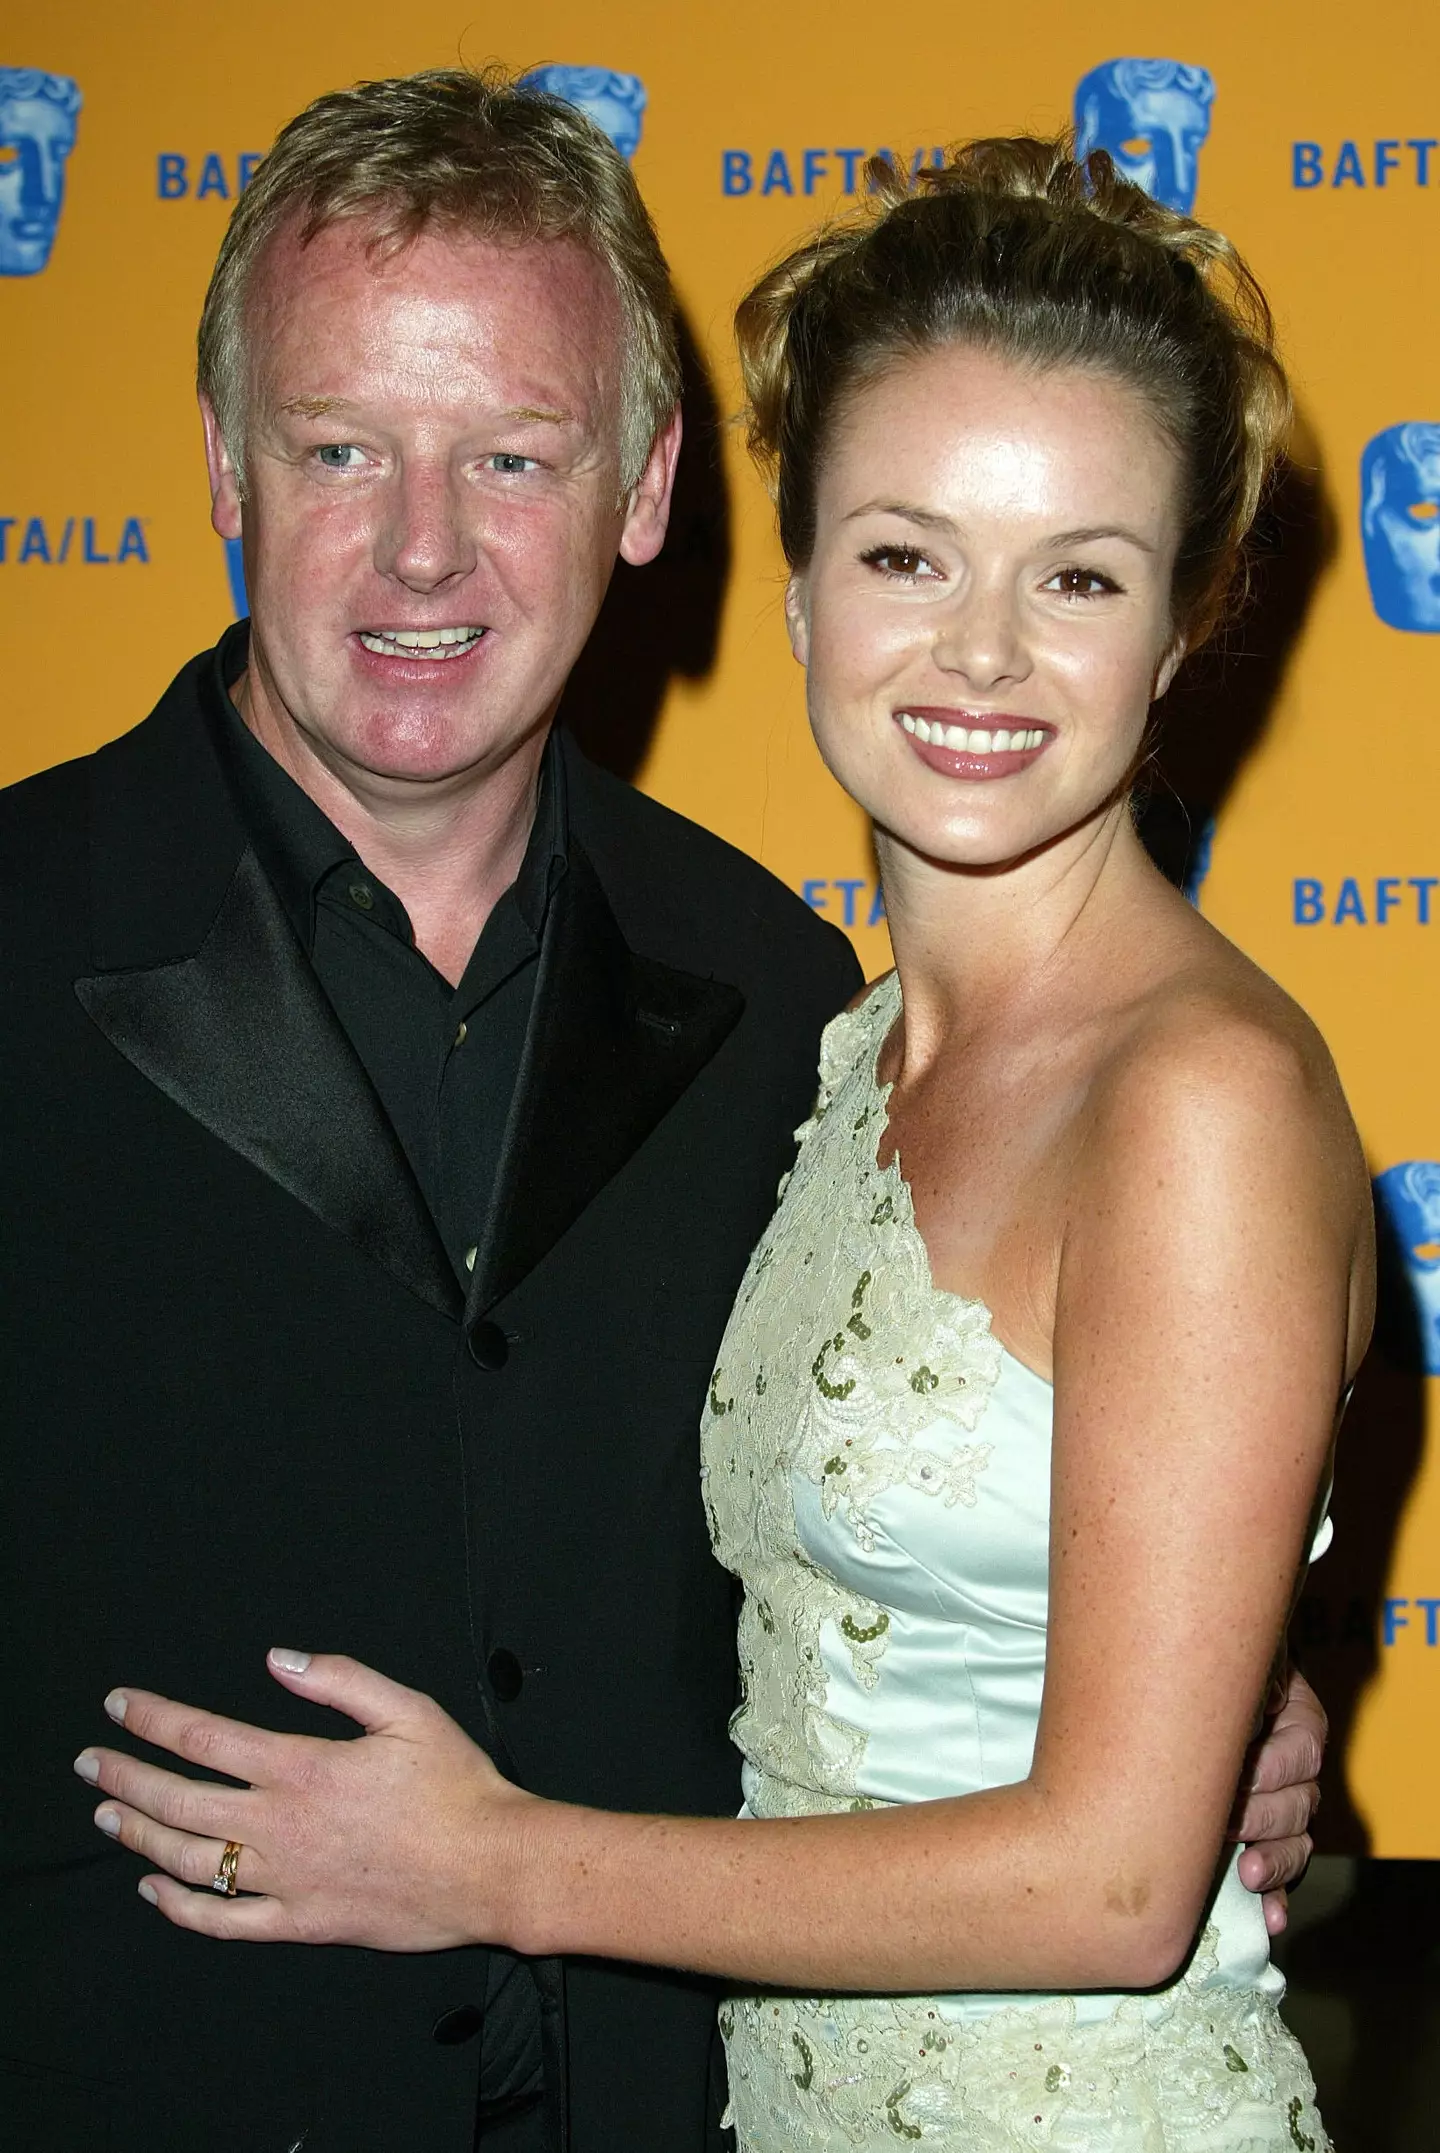 Les Dennis and Amanda Holden were married from 1995 and 2003.